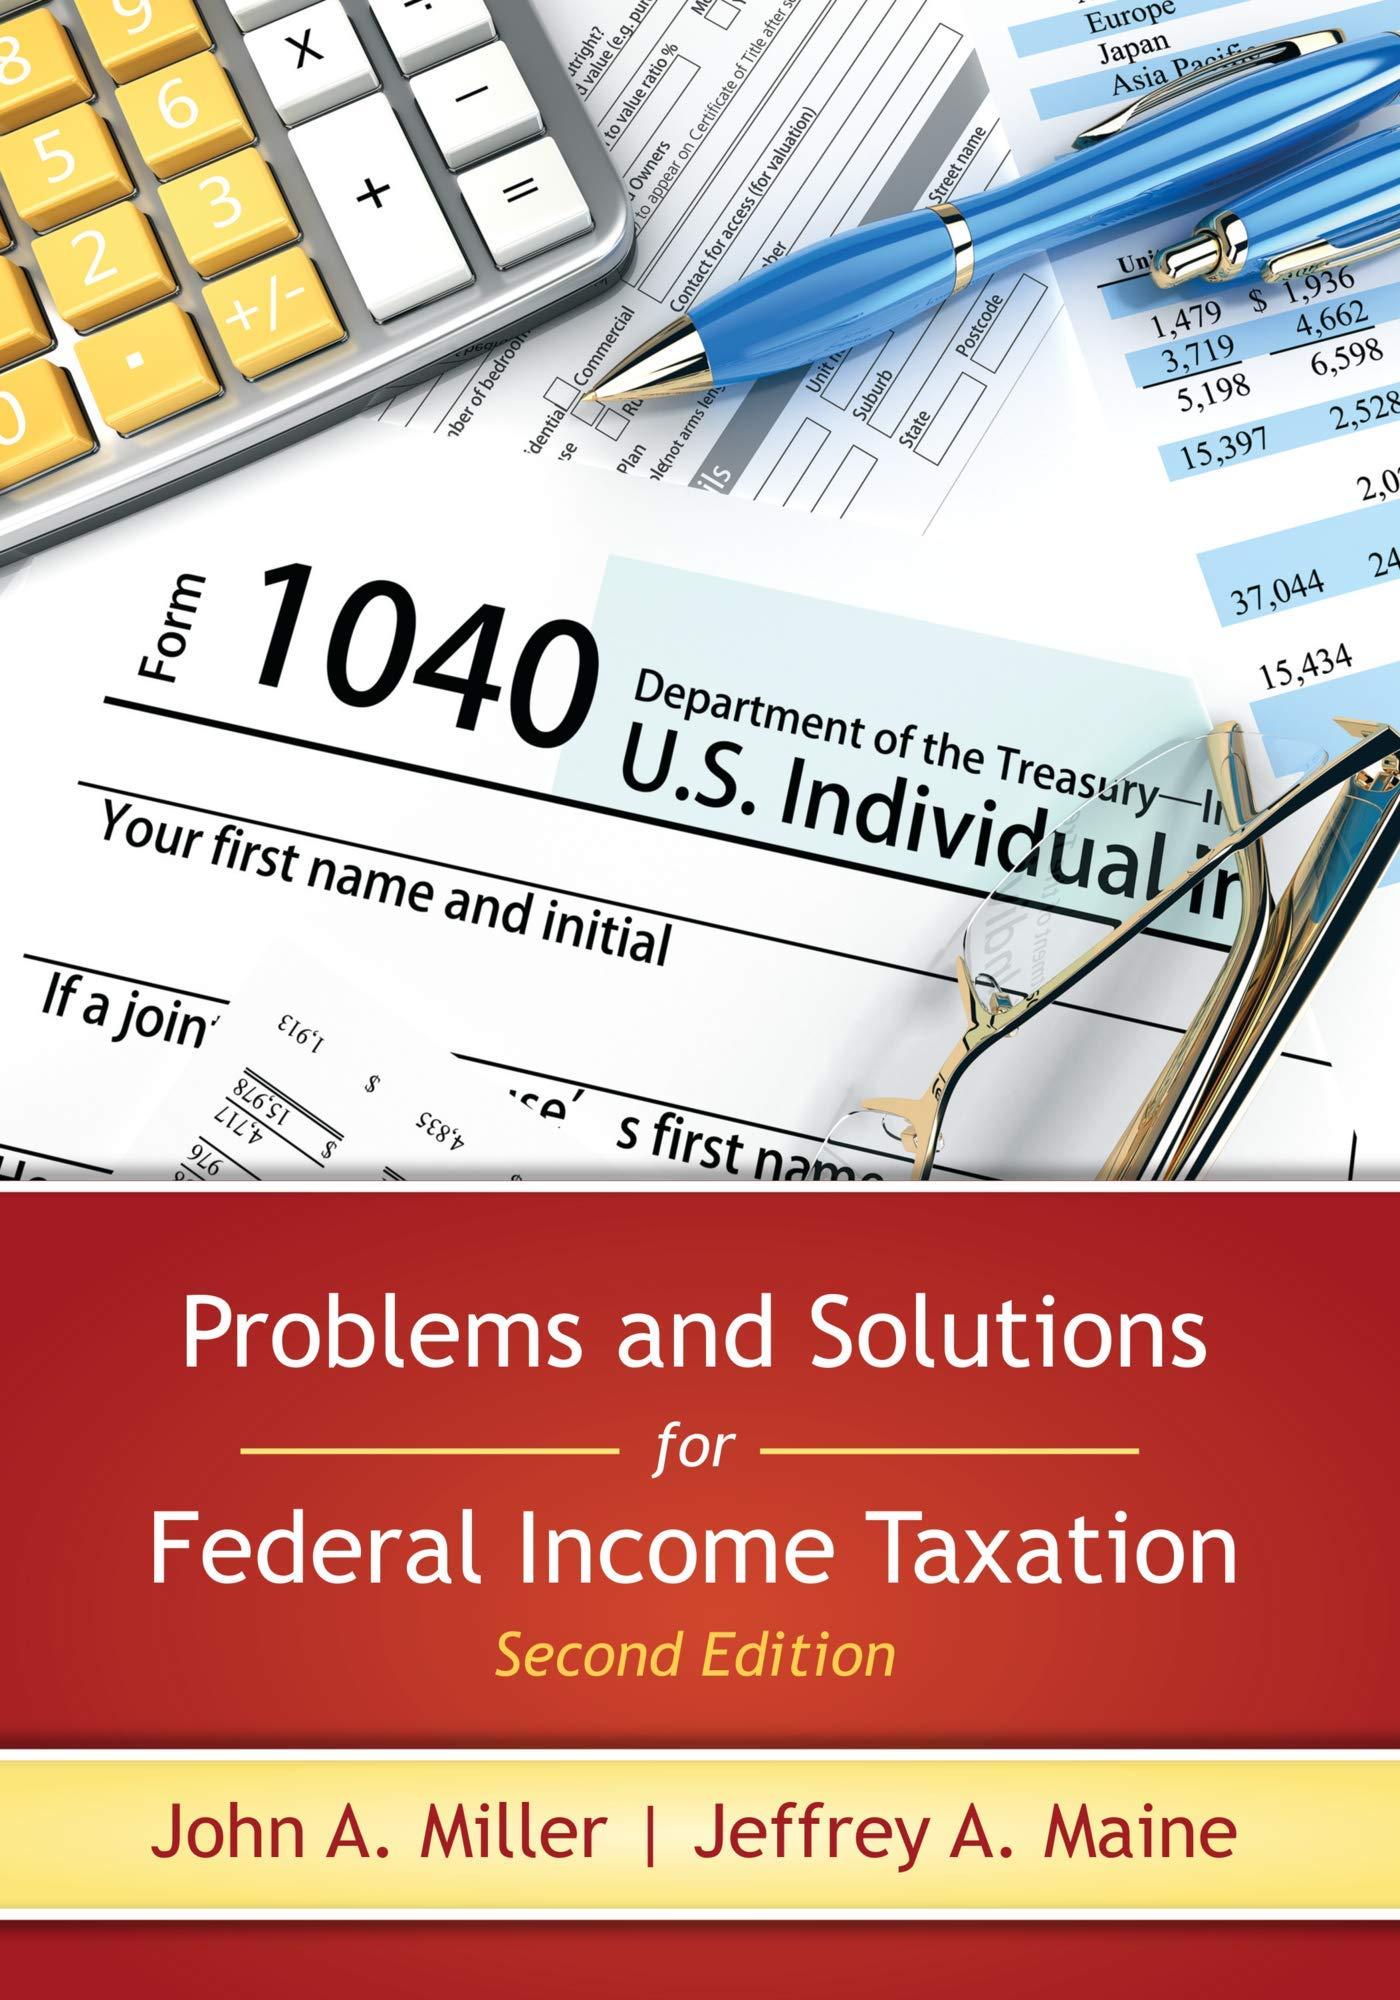 problems and solutions for federal income taxation 2nd edition john miller, jeffrey maine 1531011101,